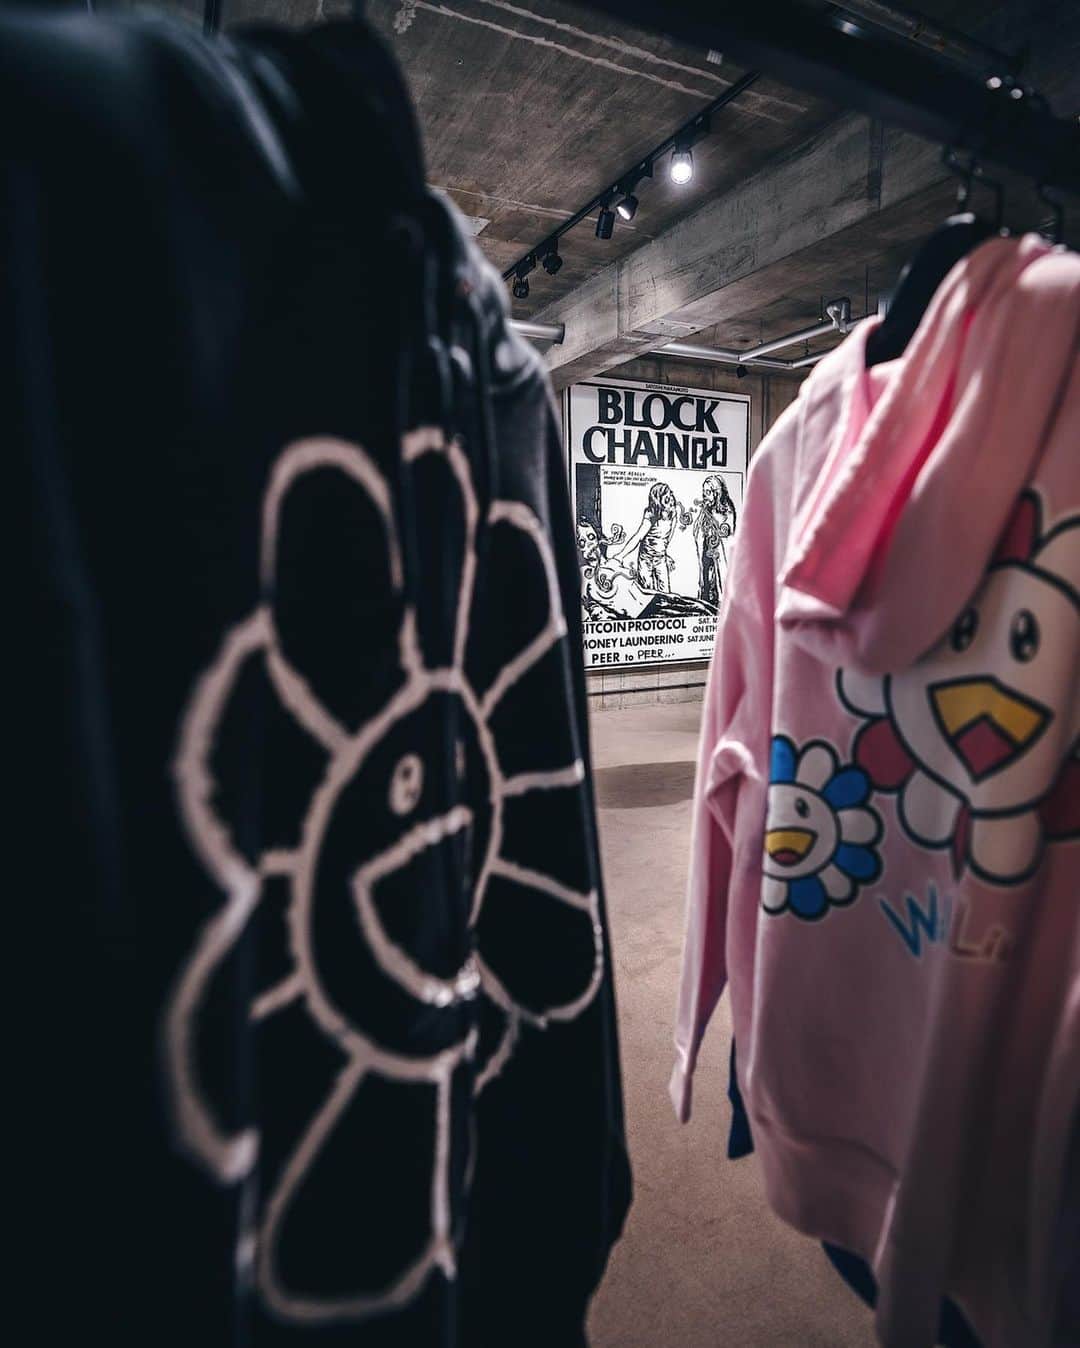 村上隆さんのインスタグラム写真 - (村上隆Instagram)「My new clothing line at Cherry Fukuoka @cherry__fukuoka masks and other items. The highlight of the release was the installation of the products along with my 3-meter-high large painting, BLOCKCHAIN. I first met Cherry @_________cherry_______ through Instagram and we have since been constantly discussing and contemplating fashion together. This time around, once again, I had so much fun developing the various products in tandem with him. The part of my brain that’s completely different from that with which I think about and produce art got activated, making me feel fresh. This kind of release may be the right approach that would allow me to get closer to the audience in Asia. I’m starting to think about releasing items in Tokyo as well.  The event in Fukuoka is on-going until December 25, so if you happen to be in the city, please make sure to stop by! photo: @rkrkrk  translation: @tabi_the_fat   チェリー福岡　@cherry__fukuoka で僕の新しい服のライン 「CONTeXT」 @context_takashipom の服やマスク、他のリリースのキャンペーンで、福岡に行って来た。白眉なのは高さ3mの大作絵画「ブロック・チェーン」のペインティングの展示とフーディー、クルーネック、マスク、版画等のインスタレーションだ。チェリーさん　@_________cherry_______ とはInstagramを通じて知り合って、ずっとファッションの事を考えたり話し合ったりさせてもらう仲間だ。今回も彼とガッツリ組み合っての商品開発はめちゃくちゃ楽しかった。アートを思考し制作する脳味噌とは全く違った部位が起動して、フレッシュな気持ちになれる。この方向での発表はアジアではオーディエンスに接近できるアプローテでは無いかと思う。東京でもやってみようかなぁ、とか、考え始めてます。イベントは12月の25日迄開催なので、福岡に立ち寄る方は是非ともお店、覗いて見てください。」12月12日 4時49分 - takashipom